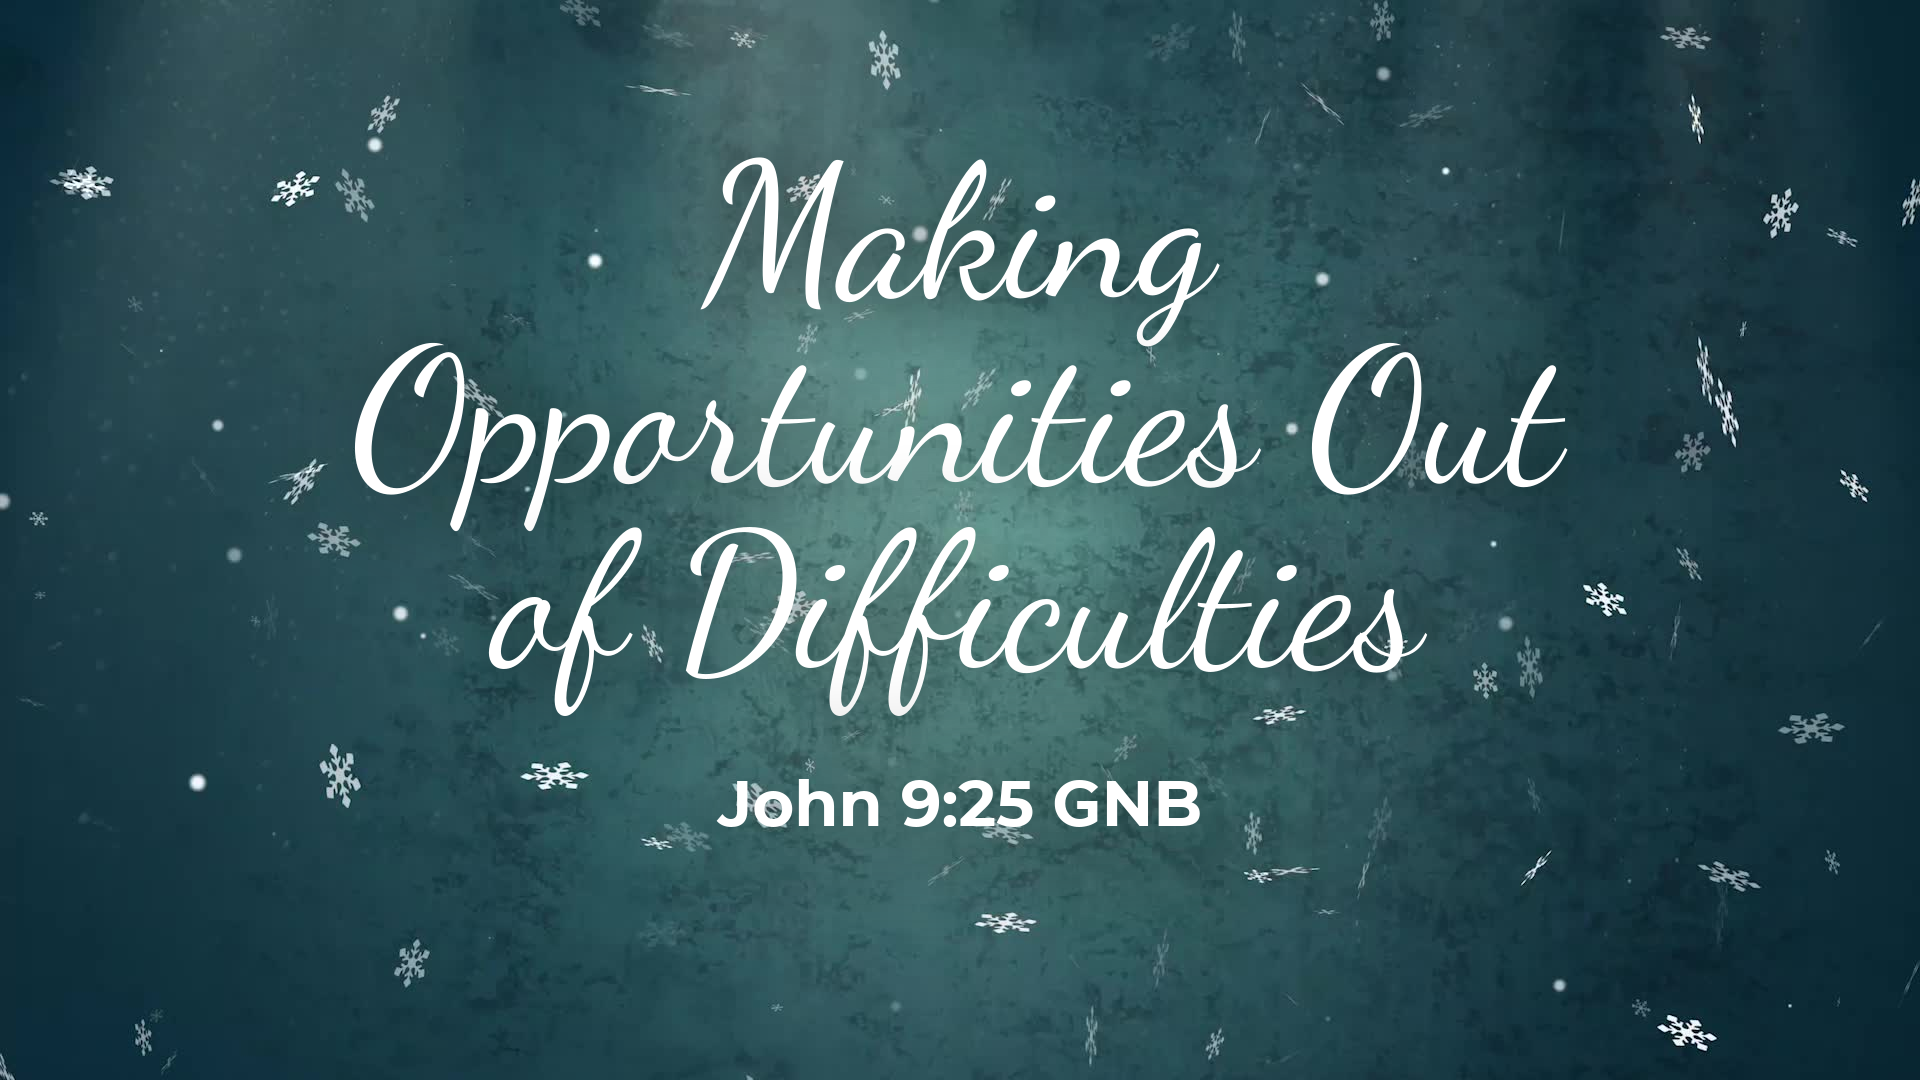 Making Opportunities Out of Difficulties